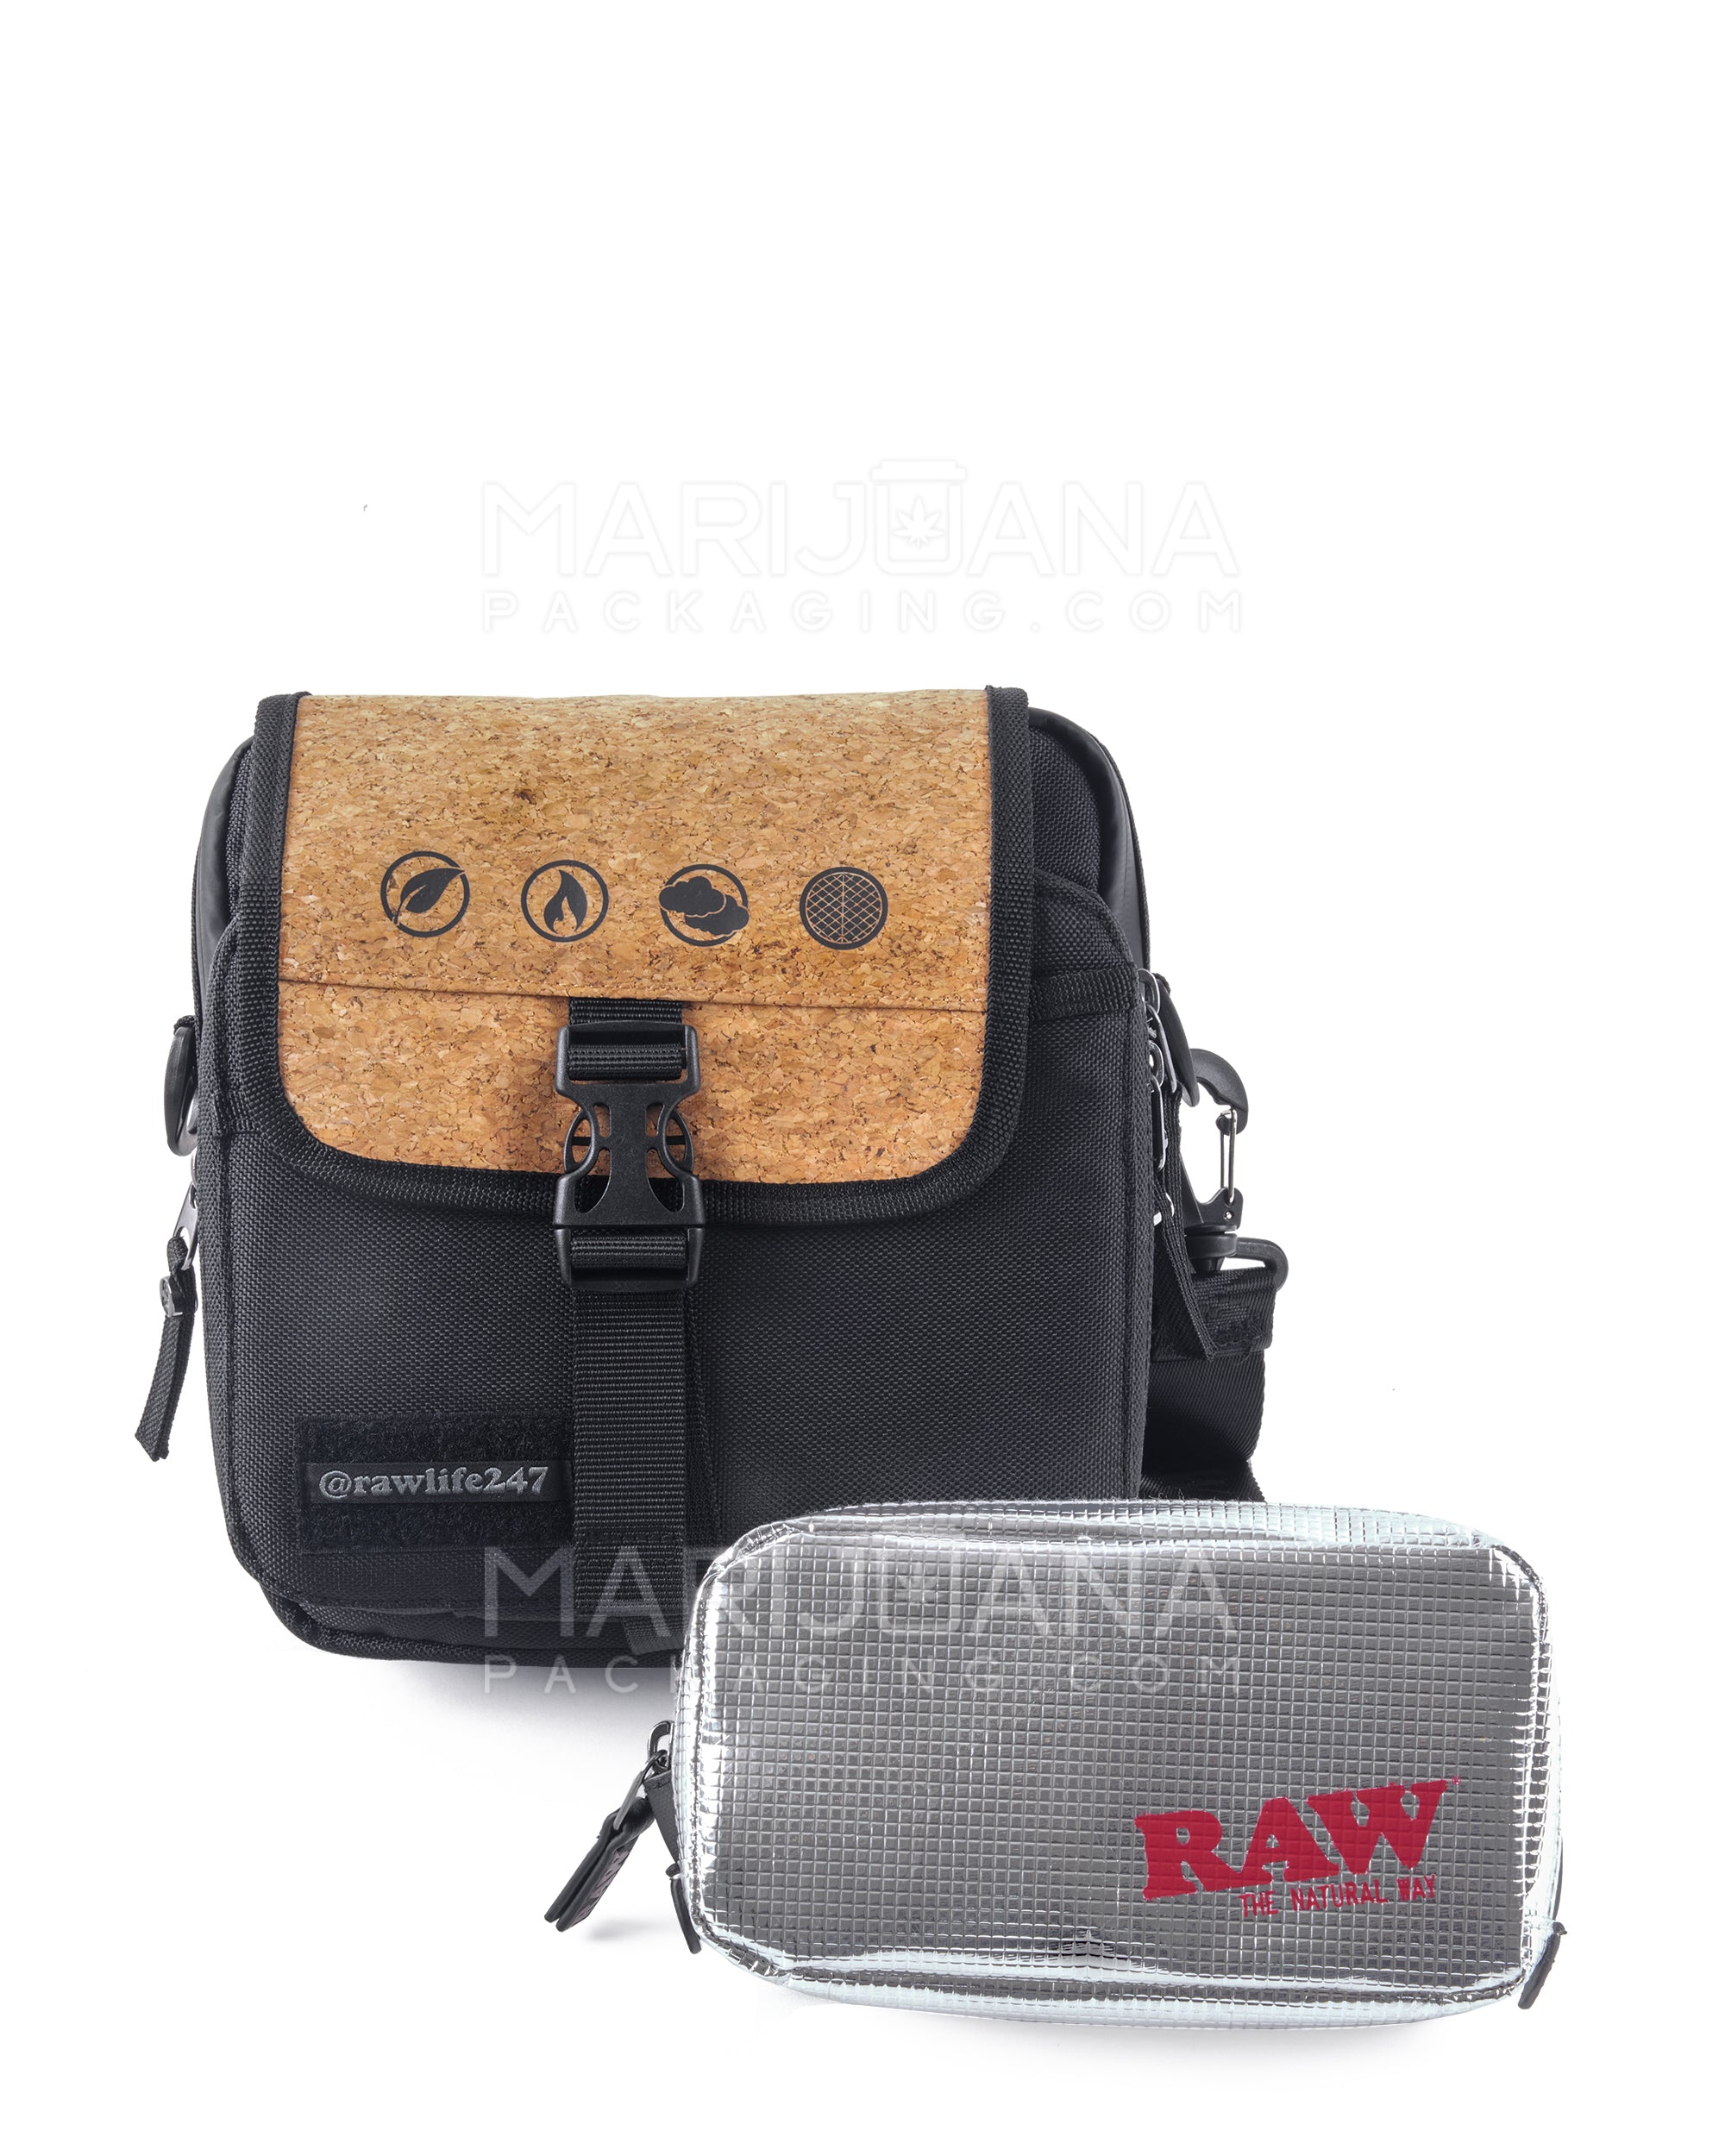 RAW | Essential Rolling Papers Day Bag - 2